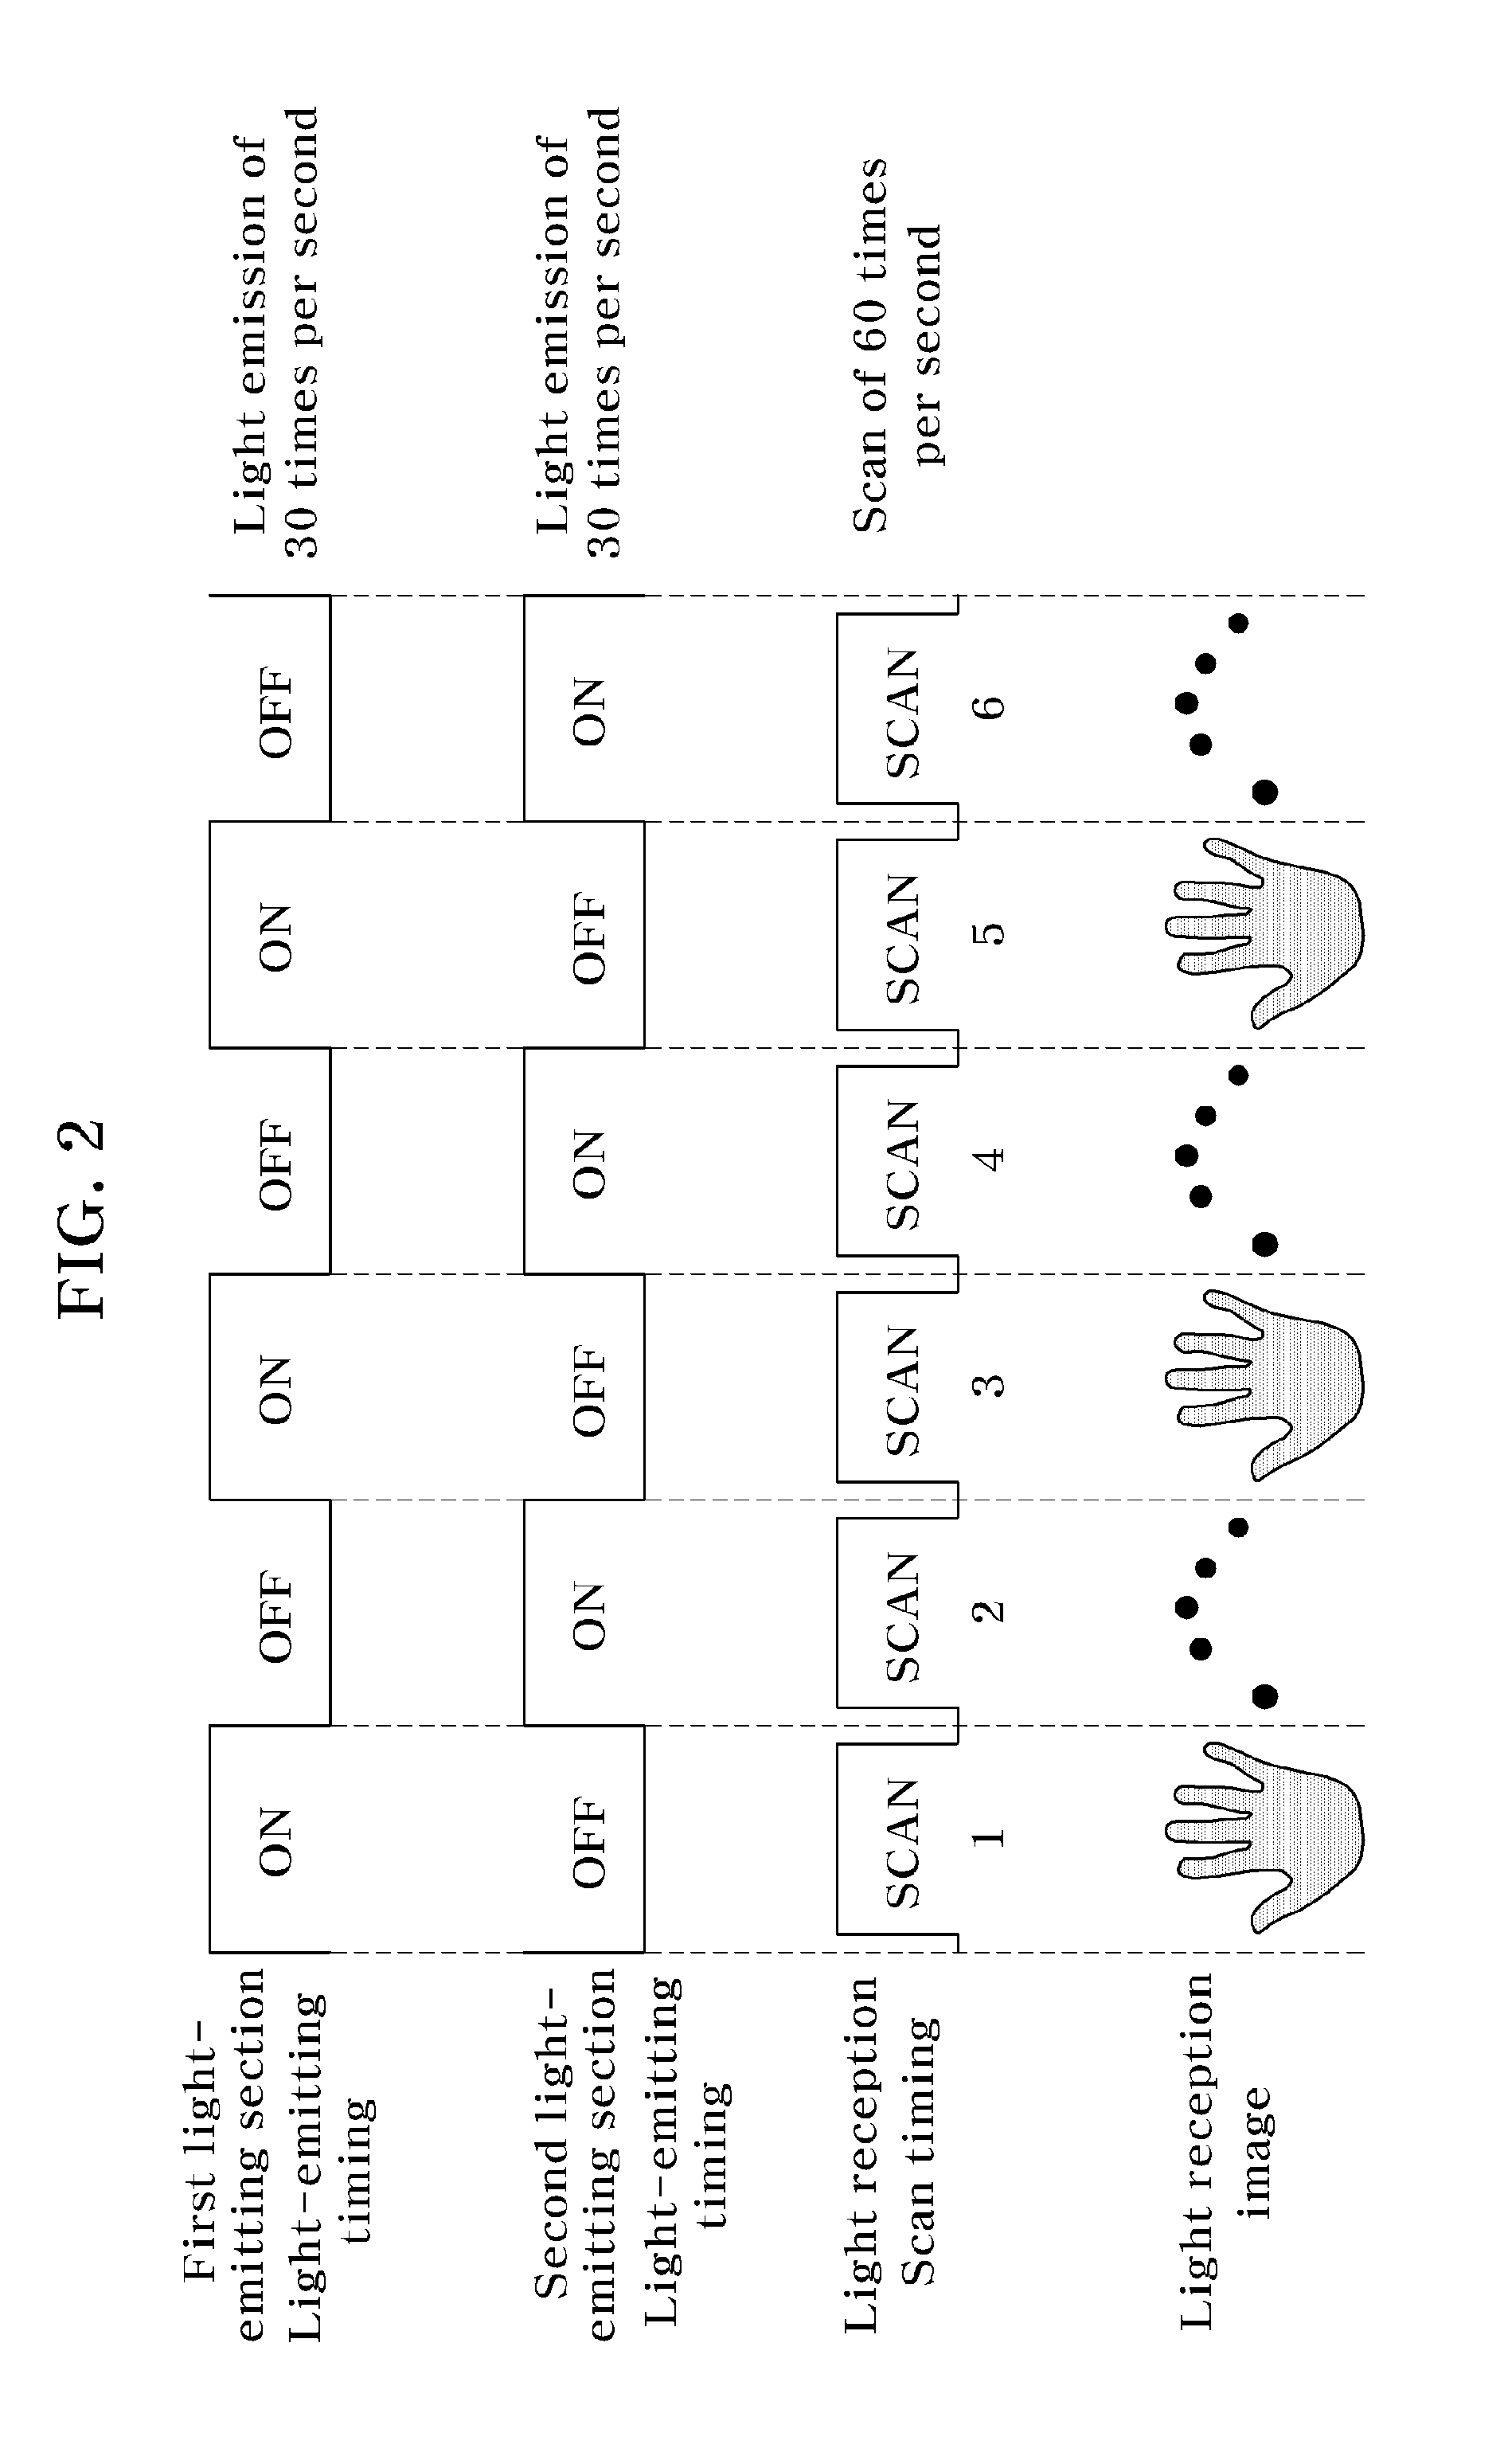 Touch screen apparatus and method for inputting user information on a screen through context awareness